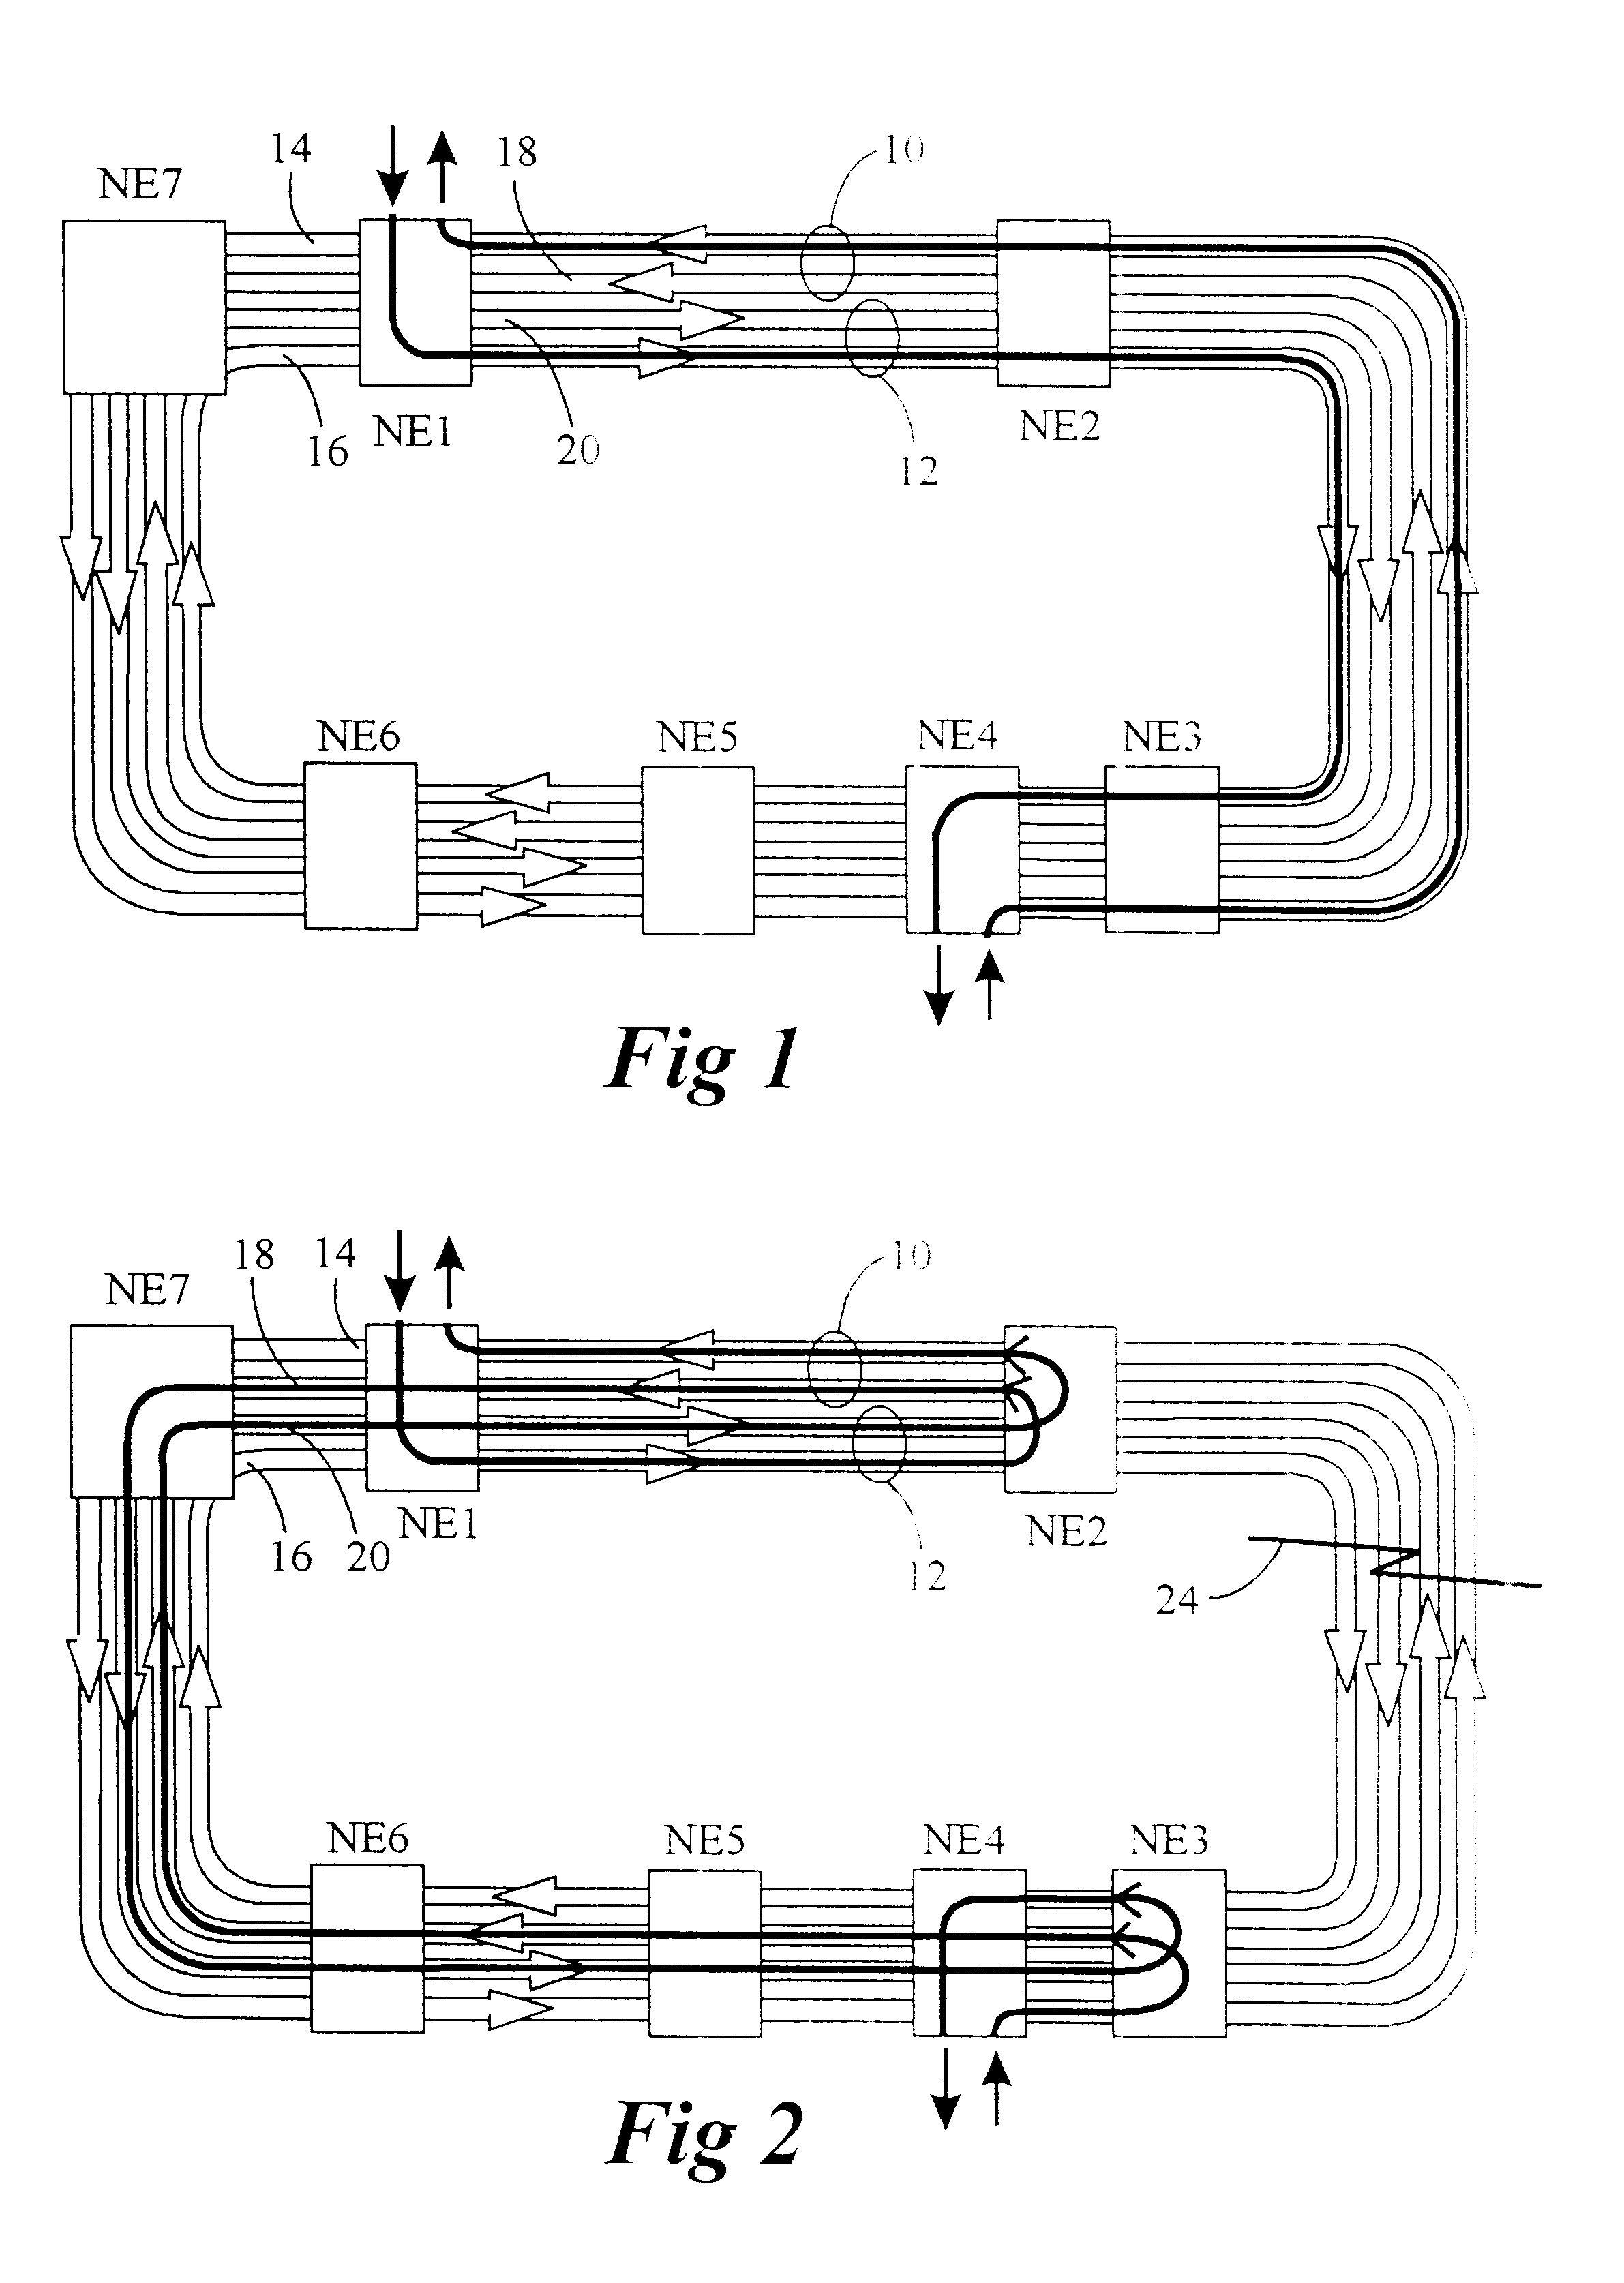 Optical ring protection having matched nodes and alternate secondary path